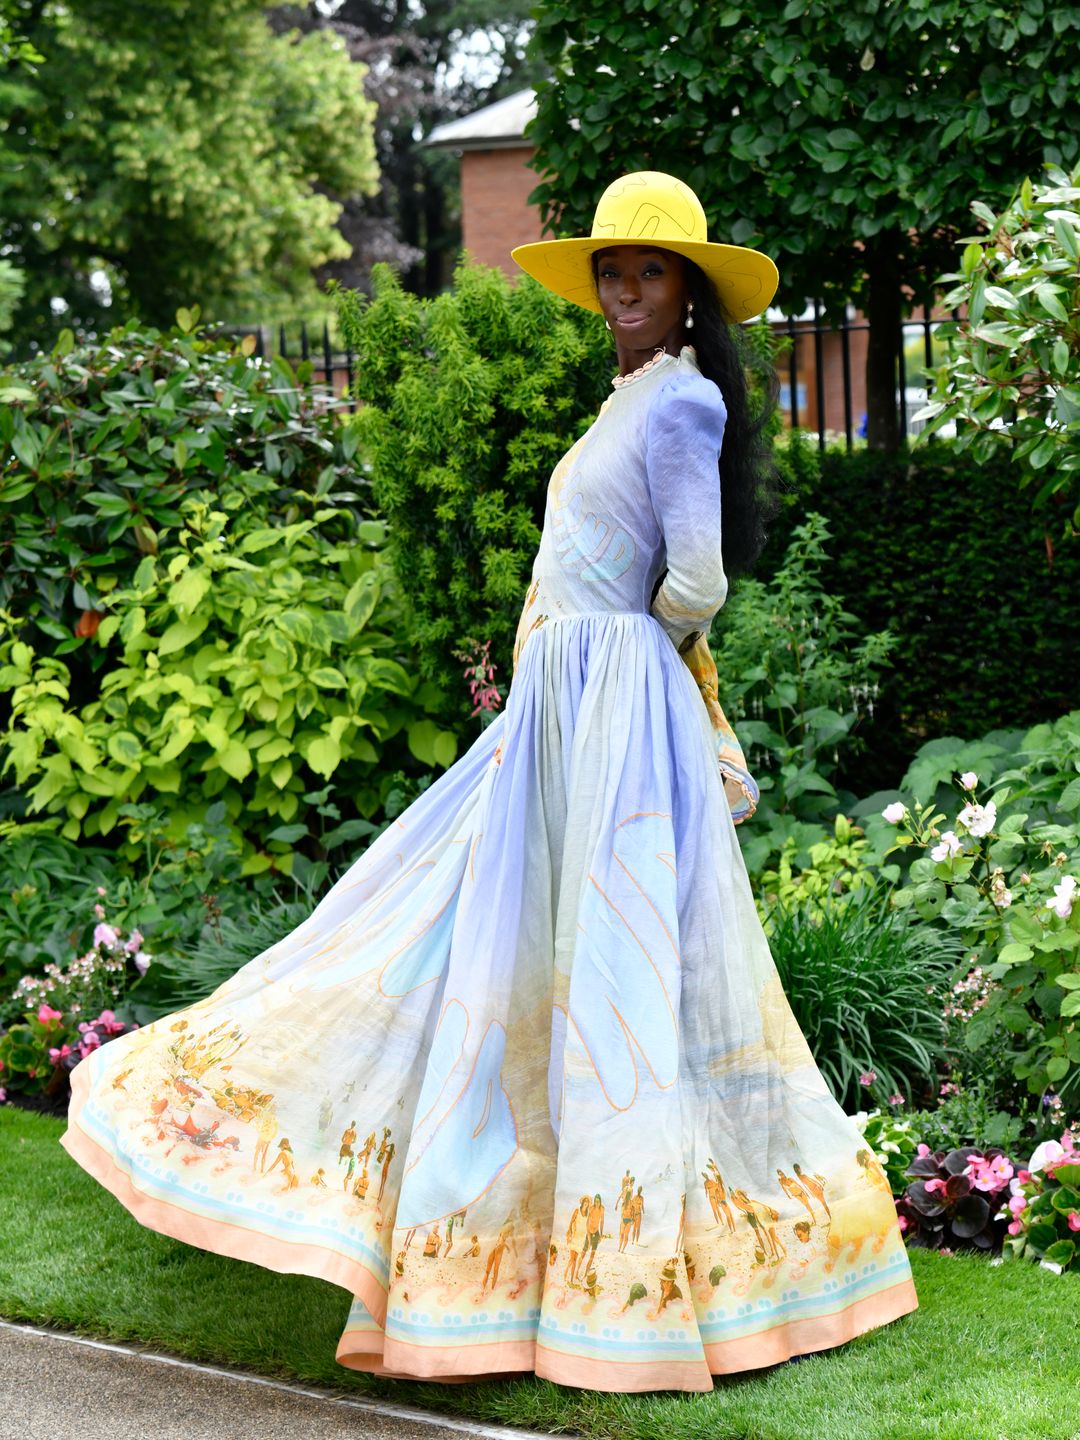 Model Eunice Olumide donned a Zimmermann dress which she paired with a striking yellow hat. 